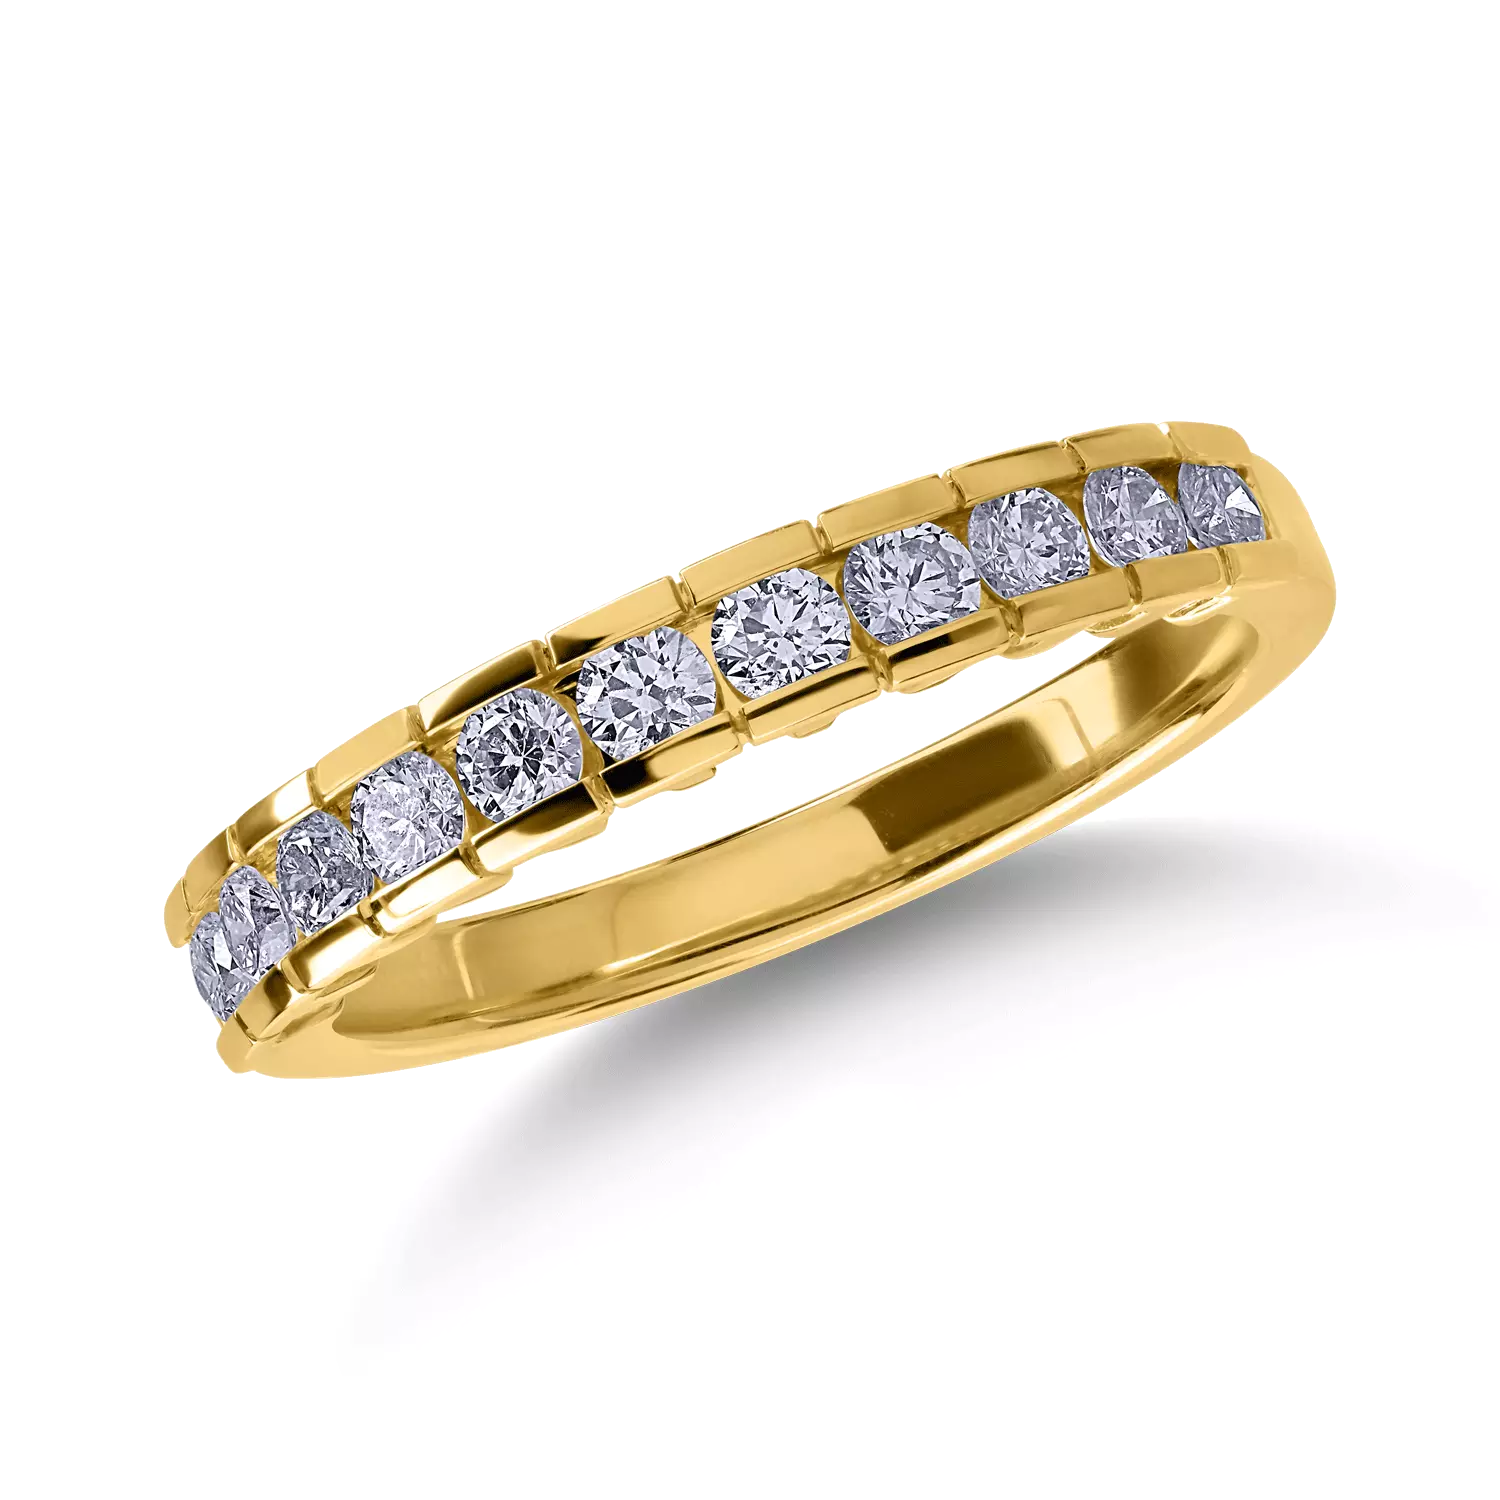 Half eternity ring in yellow gold with 0.52ct diamonds